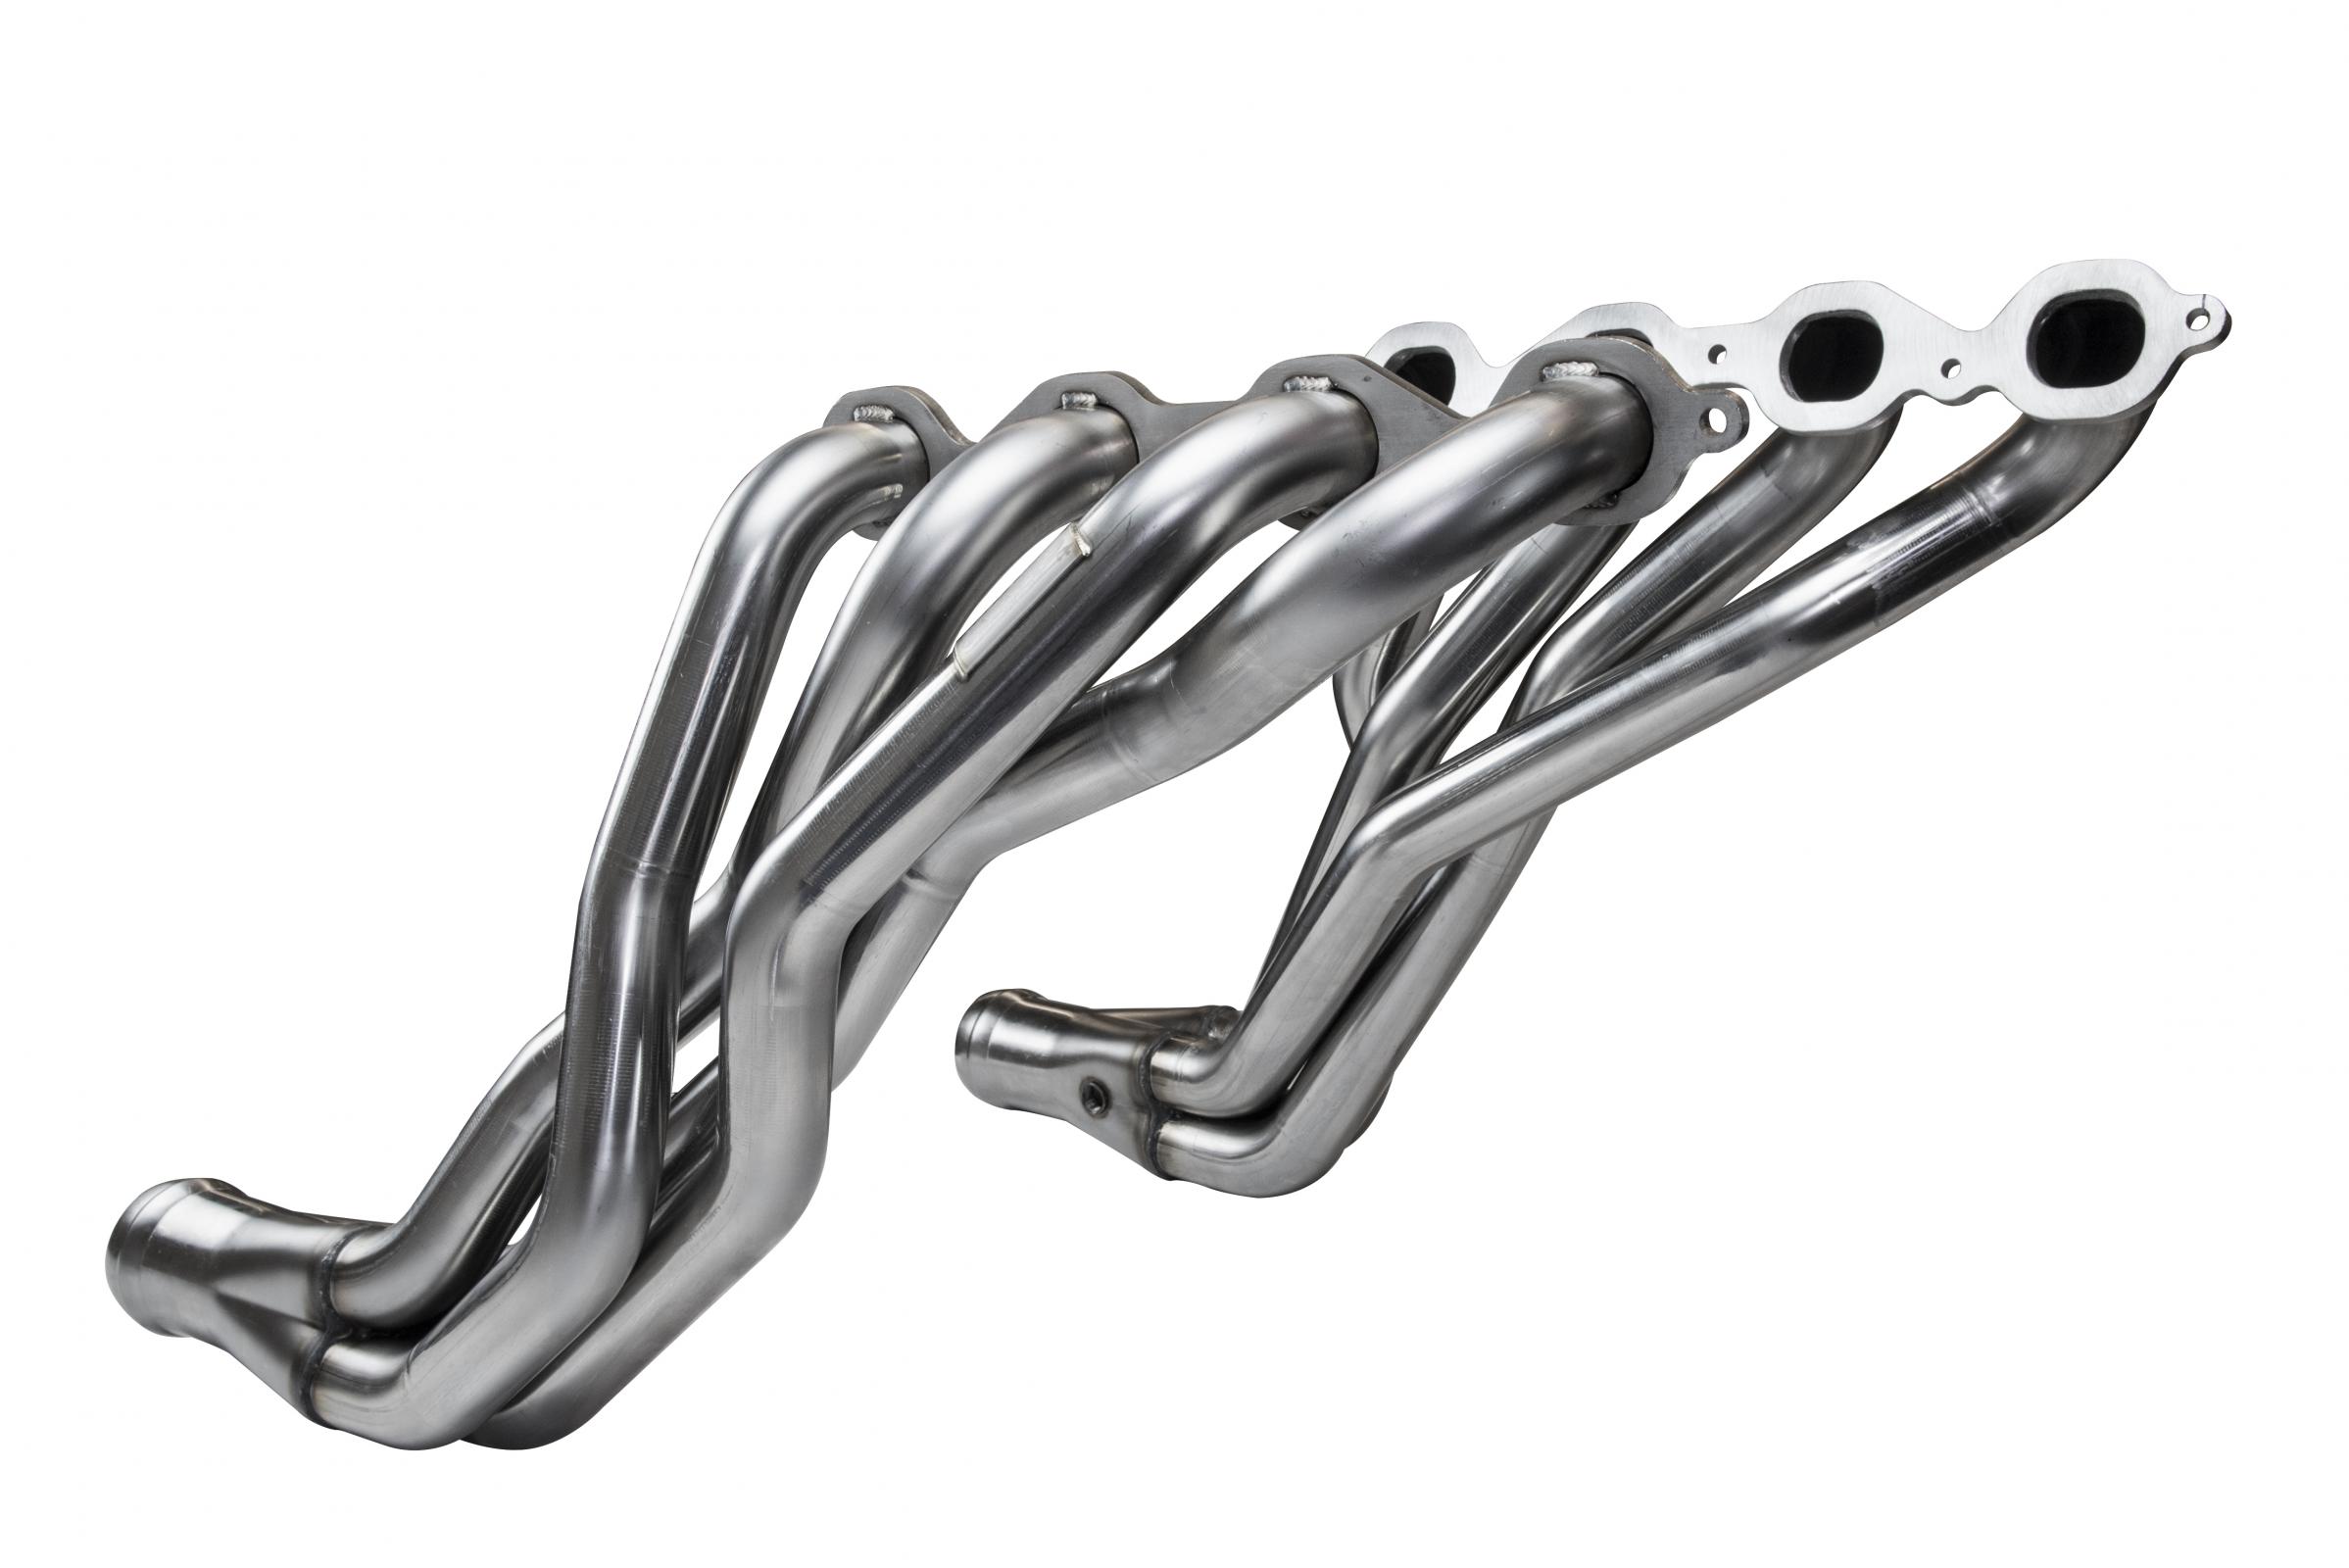 Stainless Steel Headers 1.875 x 3" Long Tube Headers Incl. Cometic Multi-Layer Gaskets/Stage 8 Bolts/Torca Clamps/02 Extensions